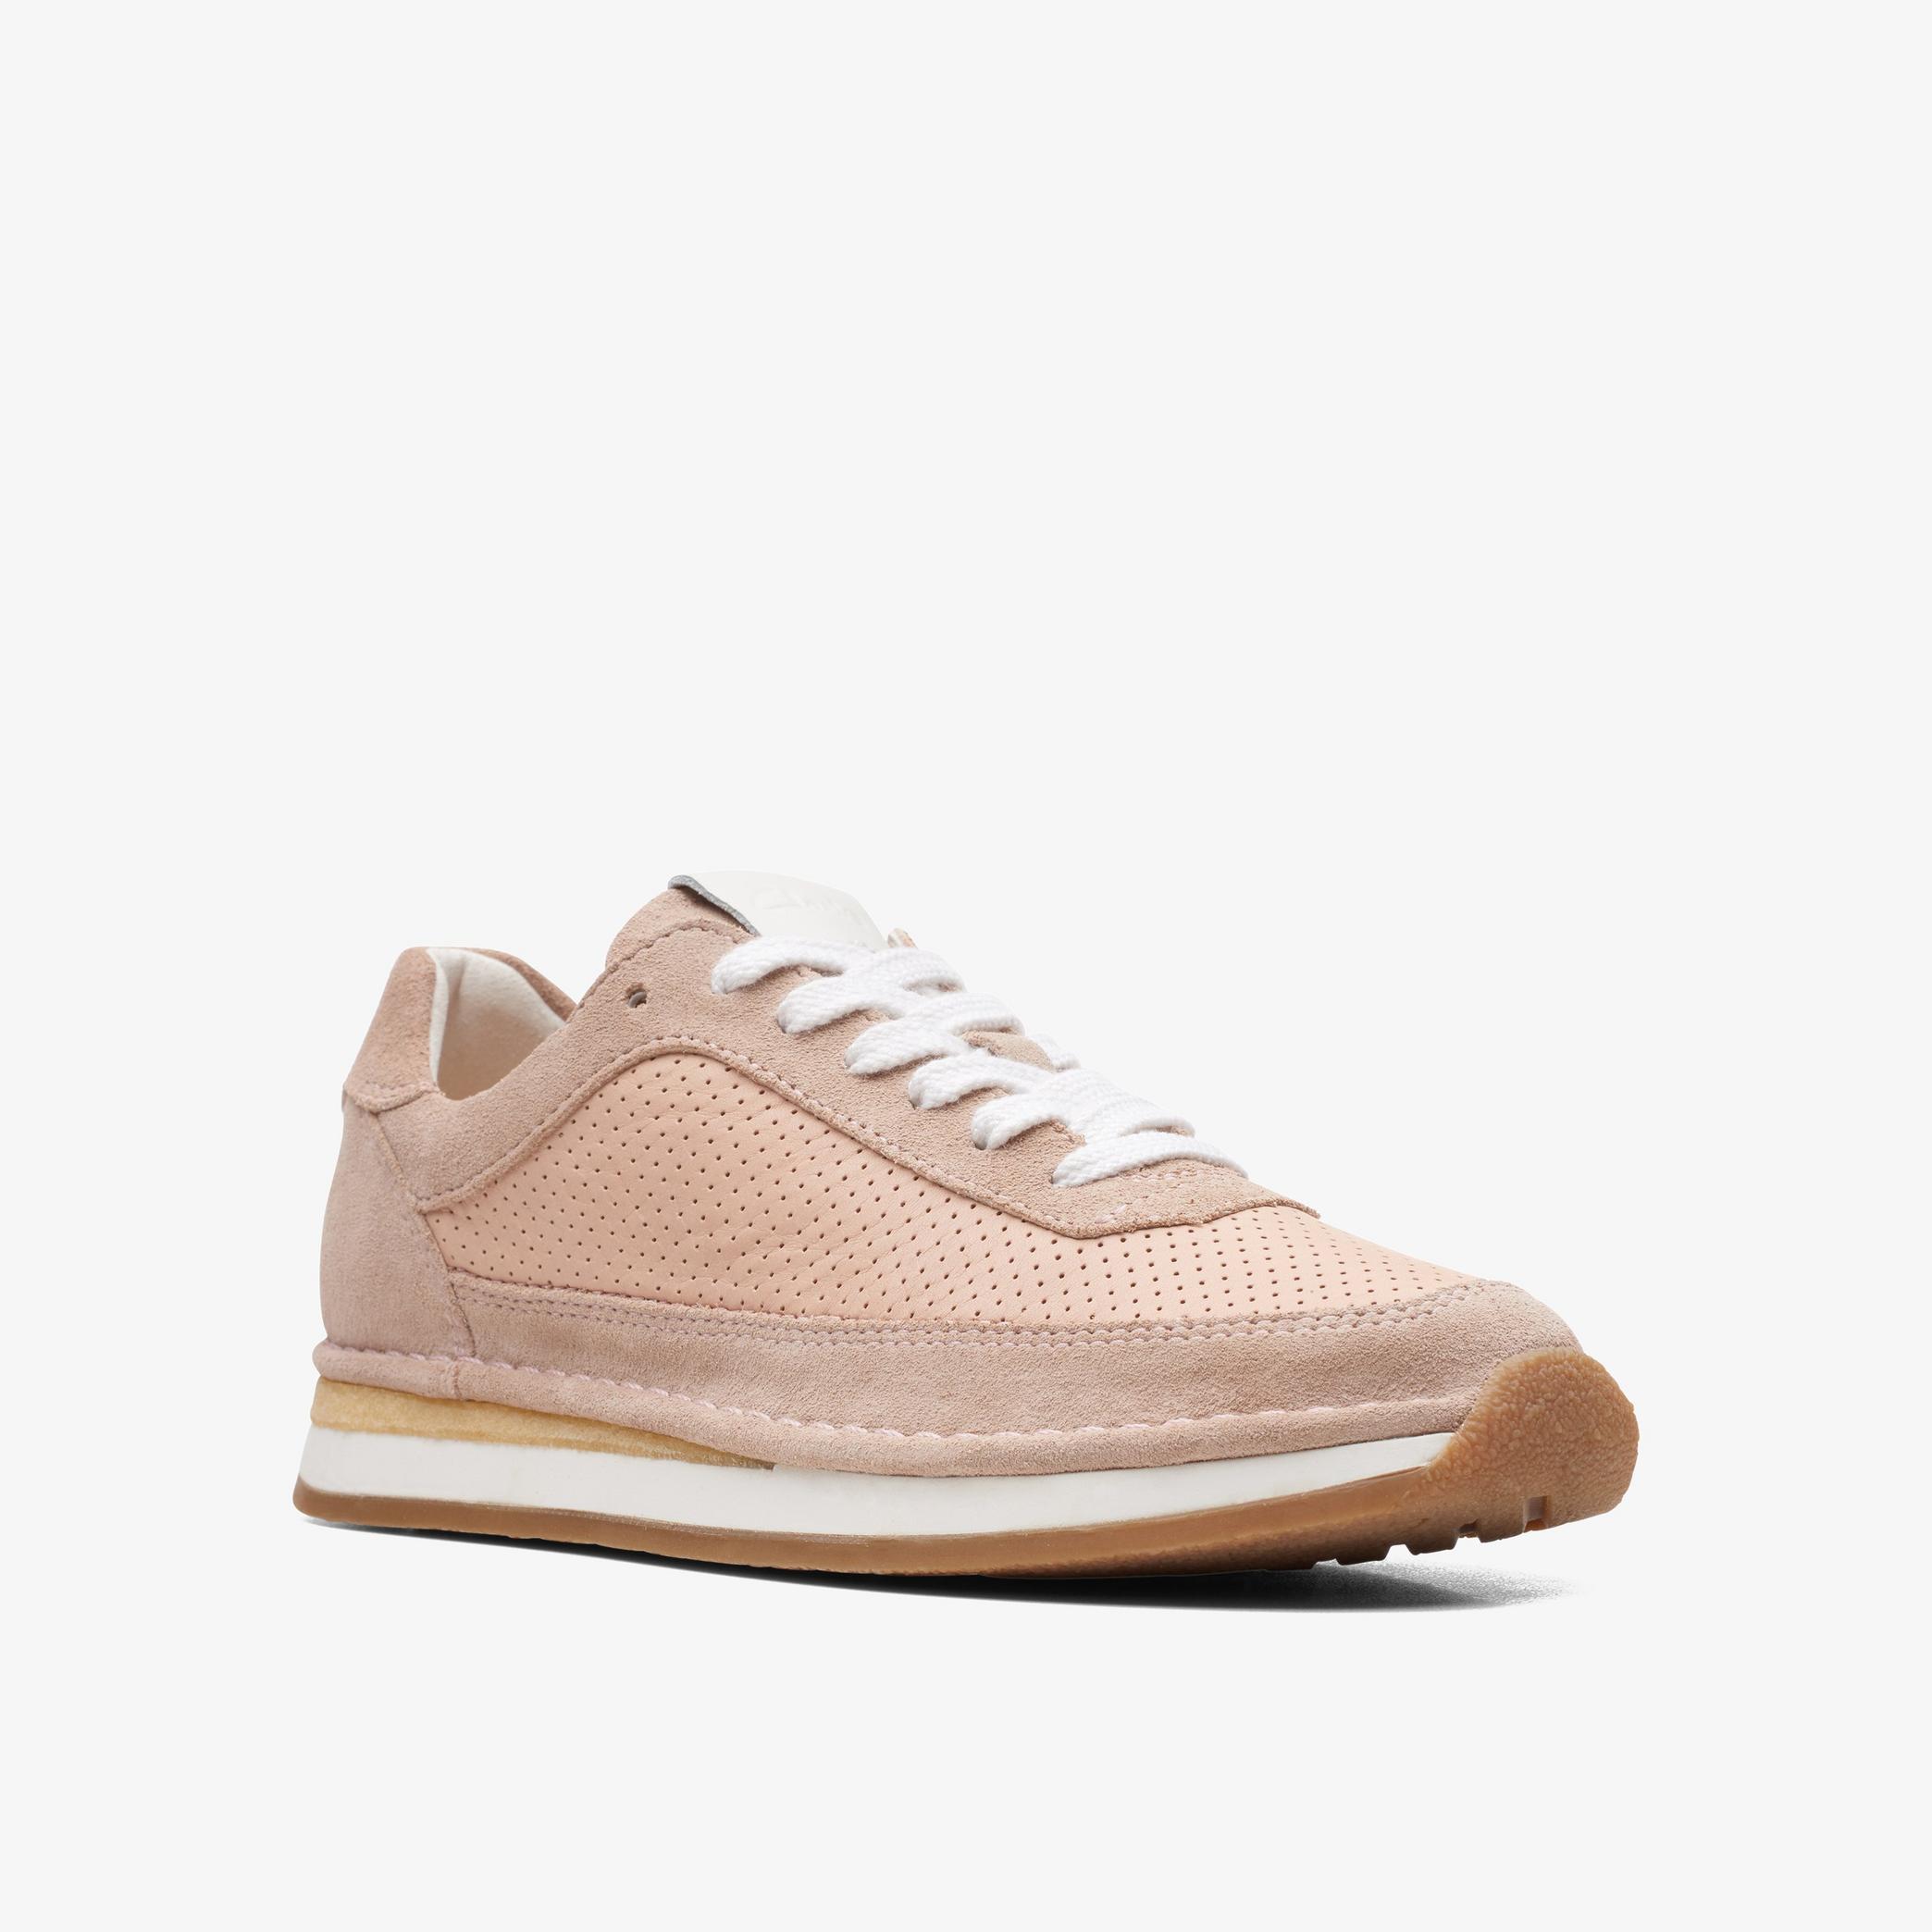 WOMENS Craft Run Air Blush Combination Trainers | Clarks Outlet